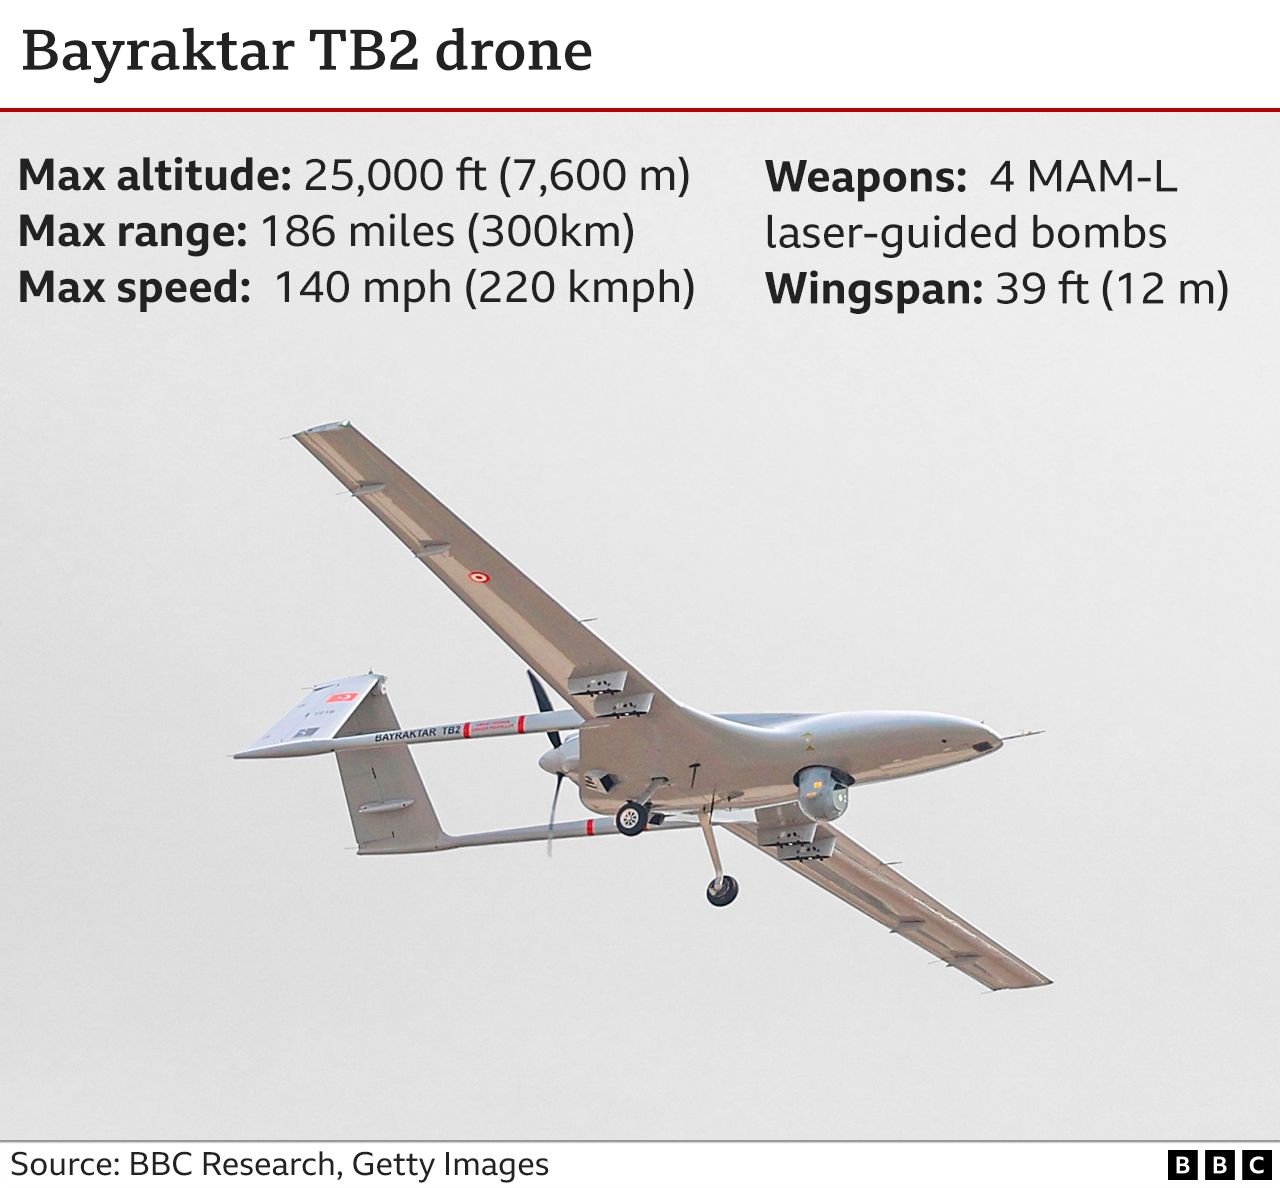 Graphic showing details of the Bayraktar TB2 drone.